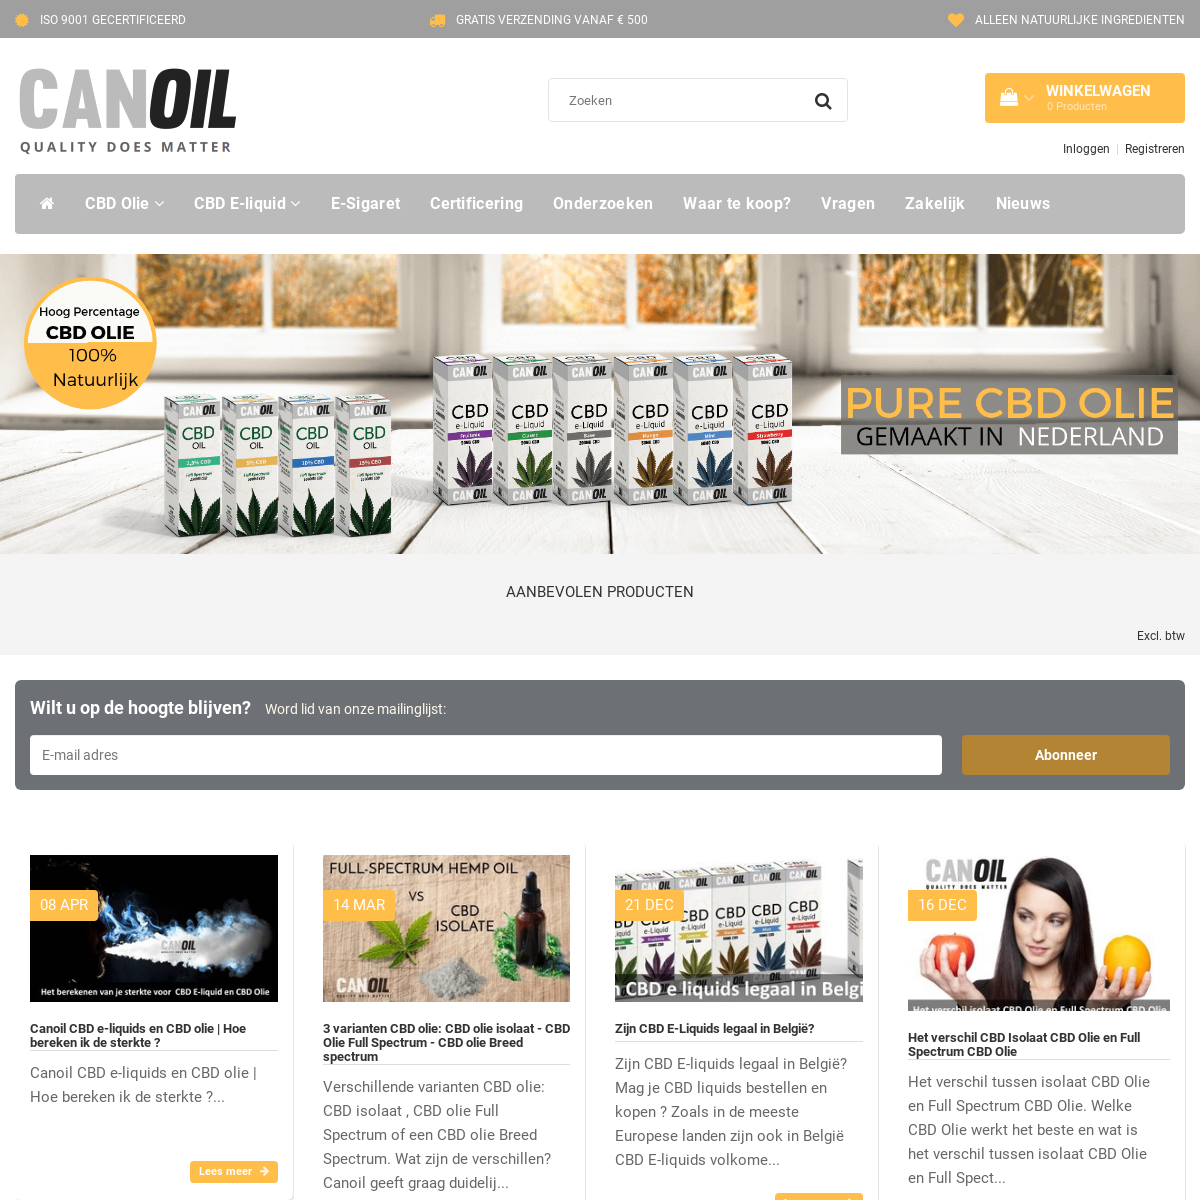 A complete backup of canoil.nl